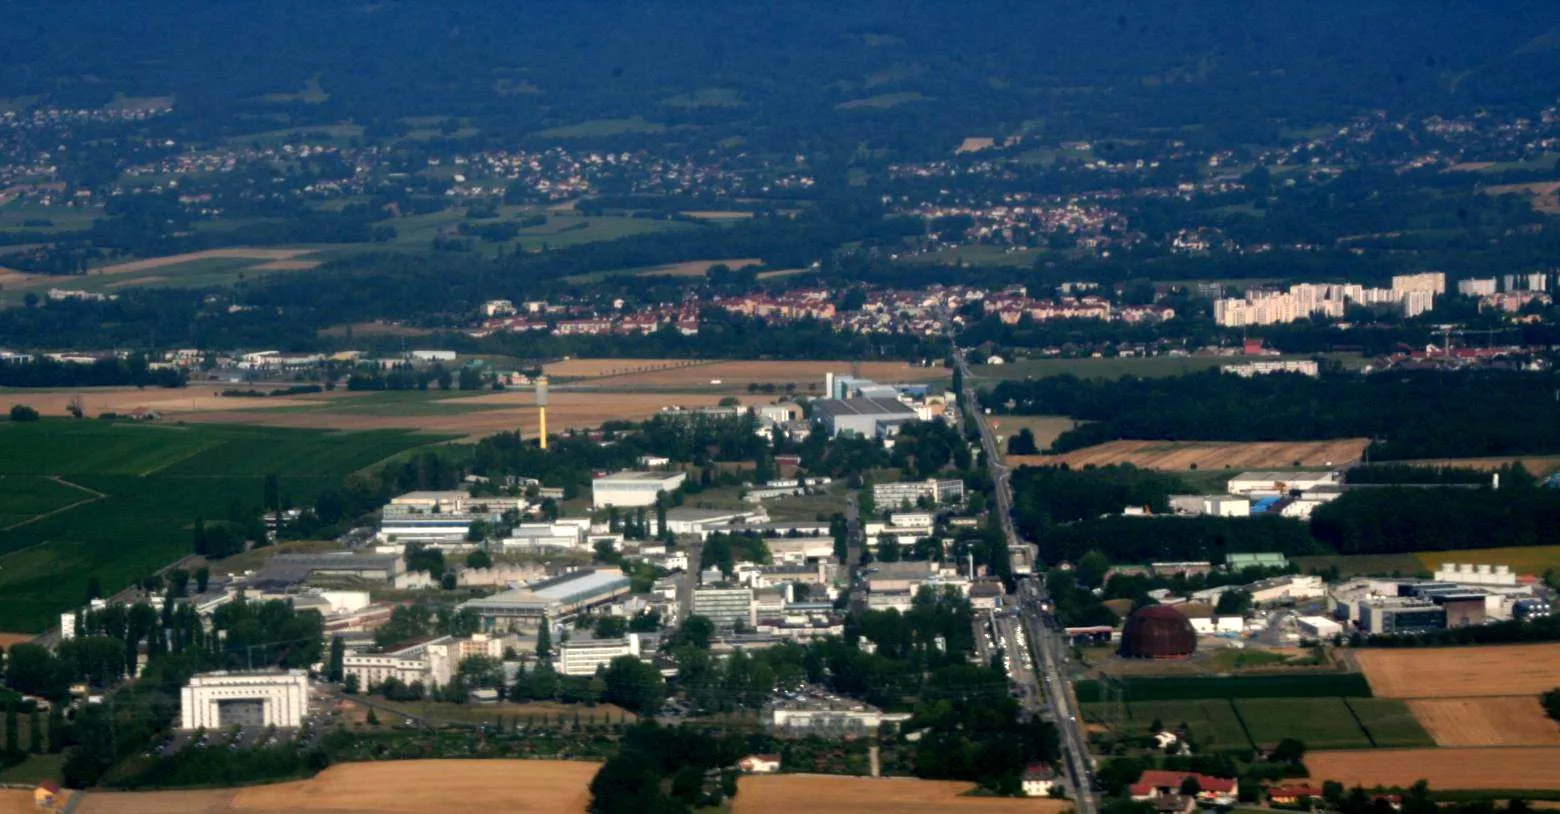 Photo showing: An aerial view of the main site of CERN, at the border between Switzerland and France near Geneva, looking towards the Jura mountains in France.